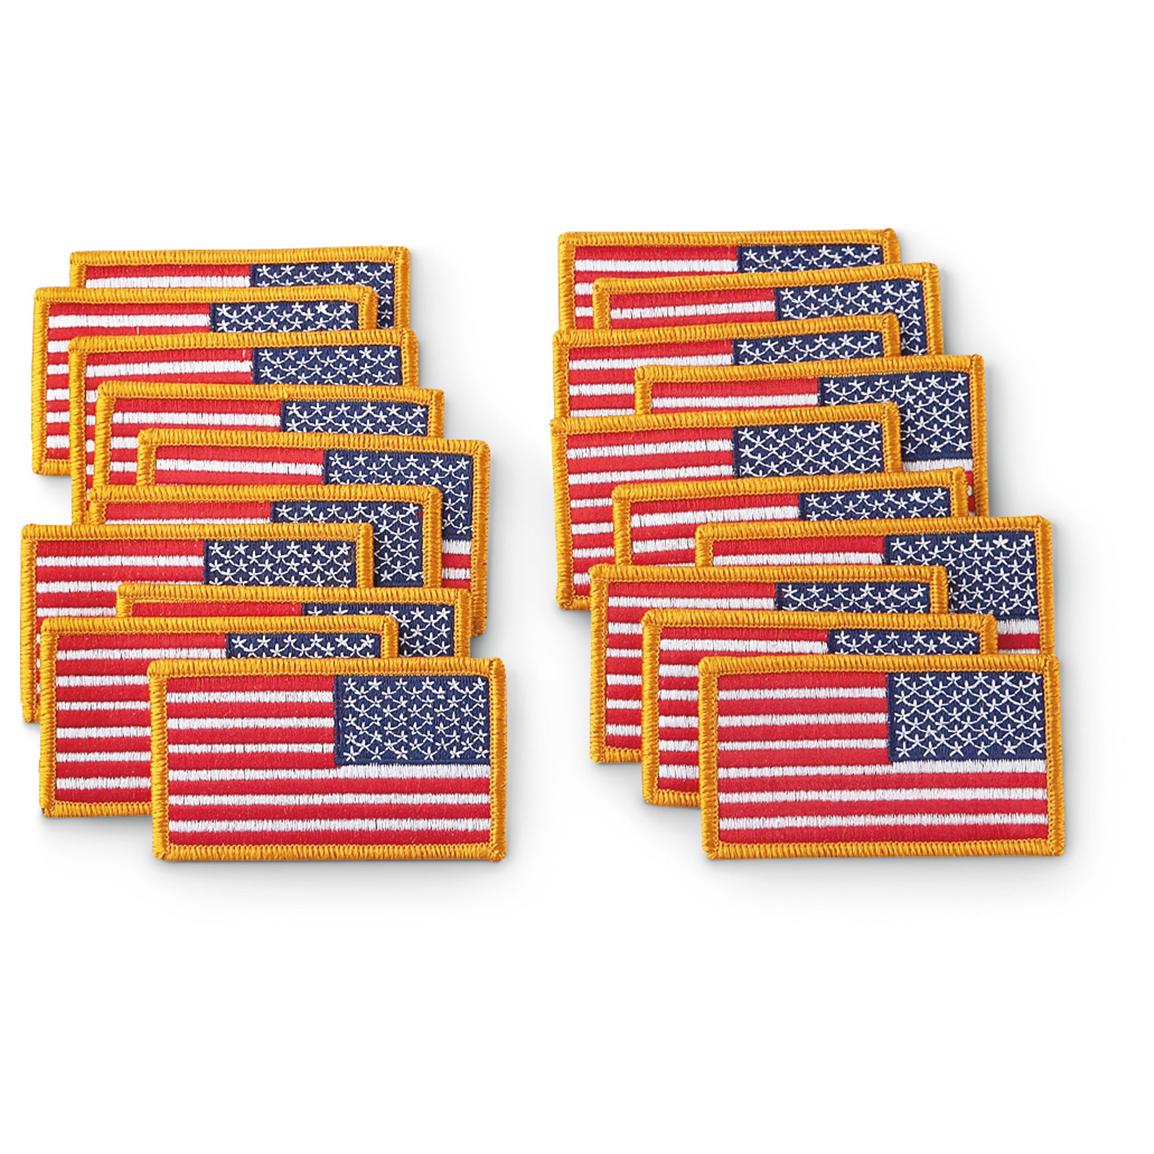 20 New U.S. Military Surplus U.S.A. Flag Patch Set Right - side ...